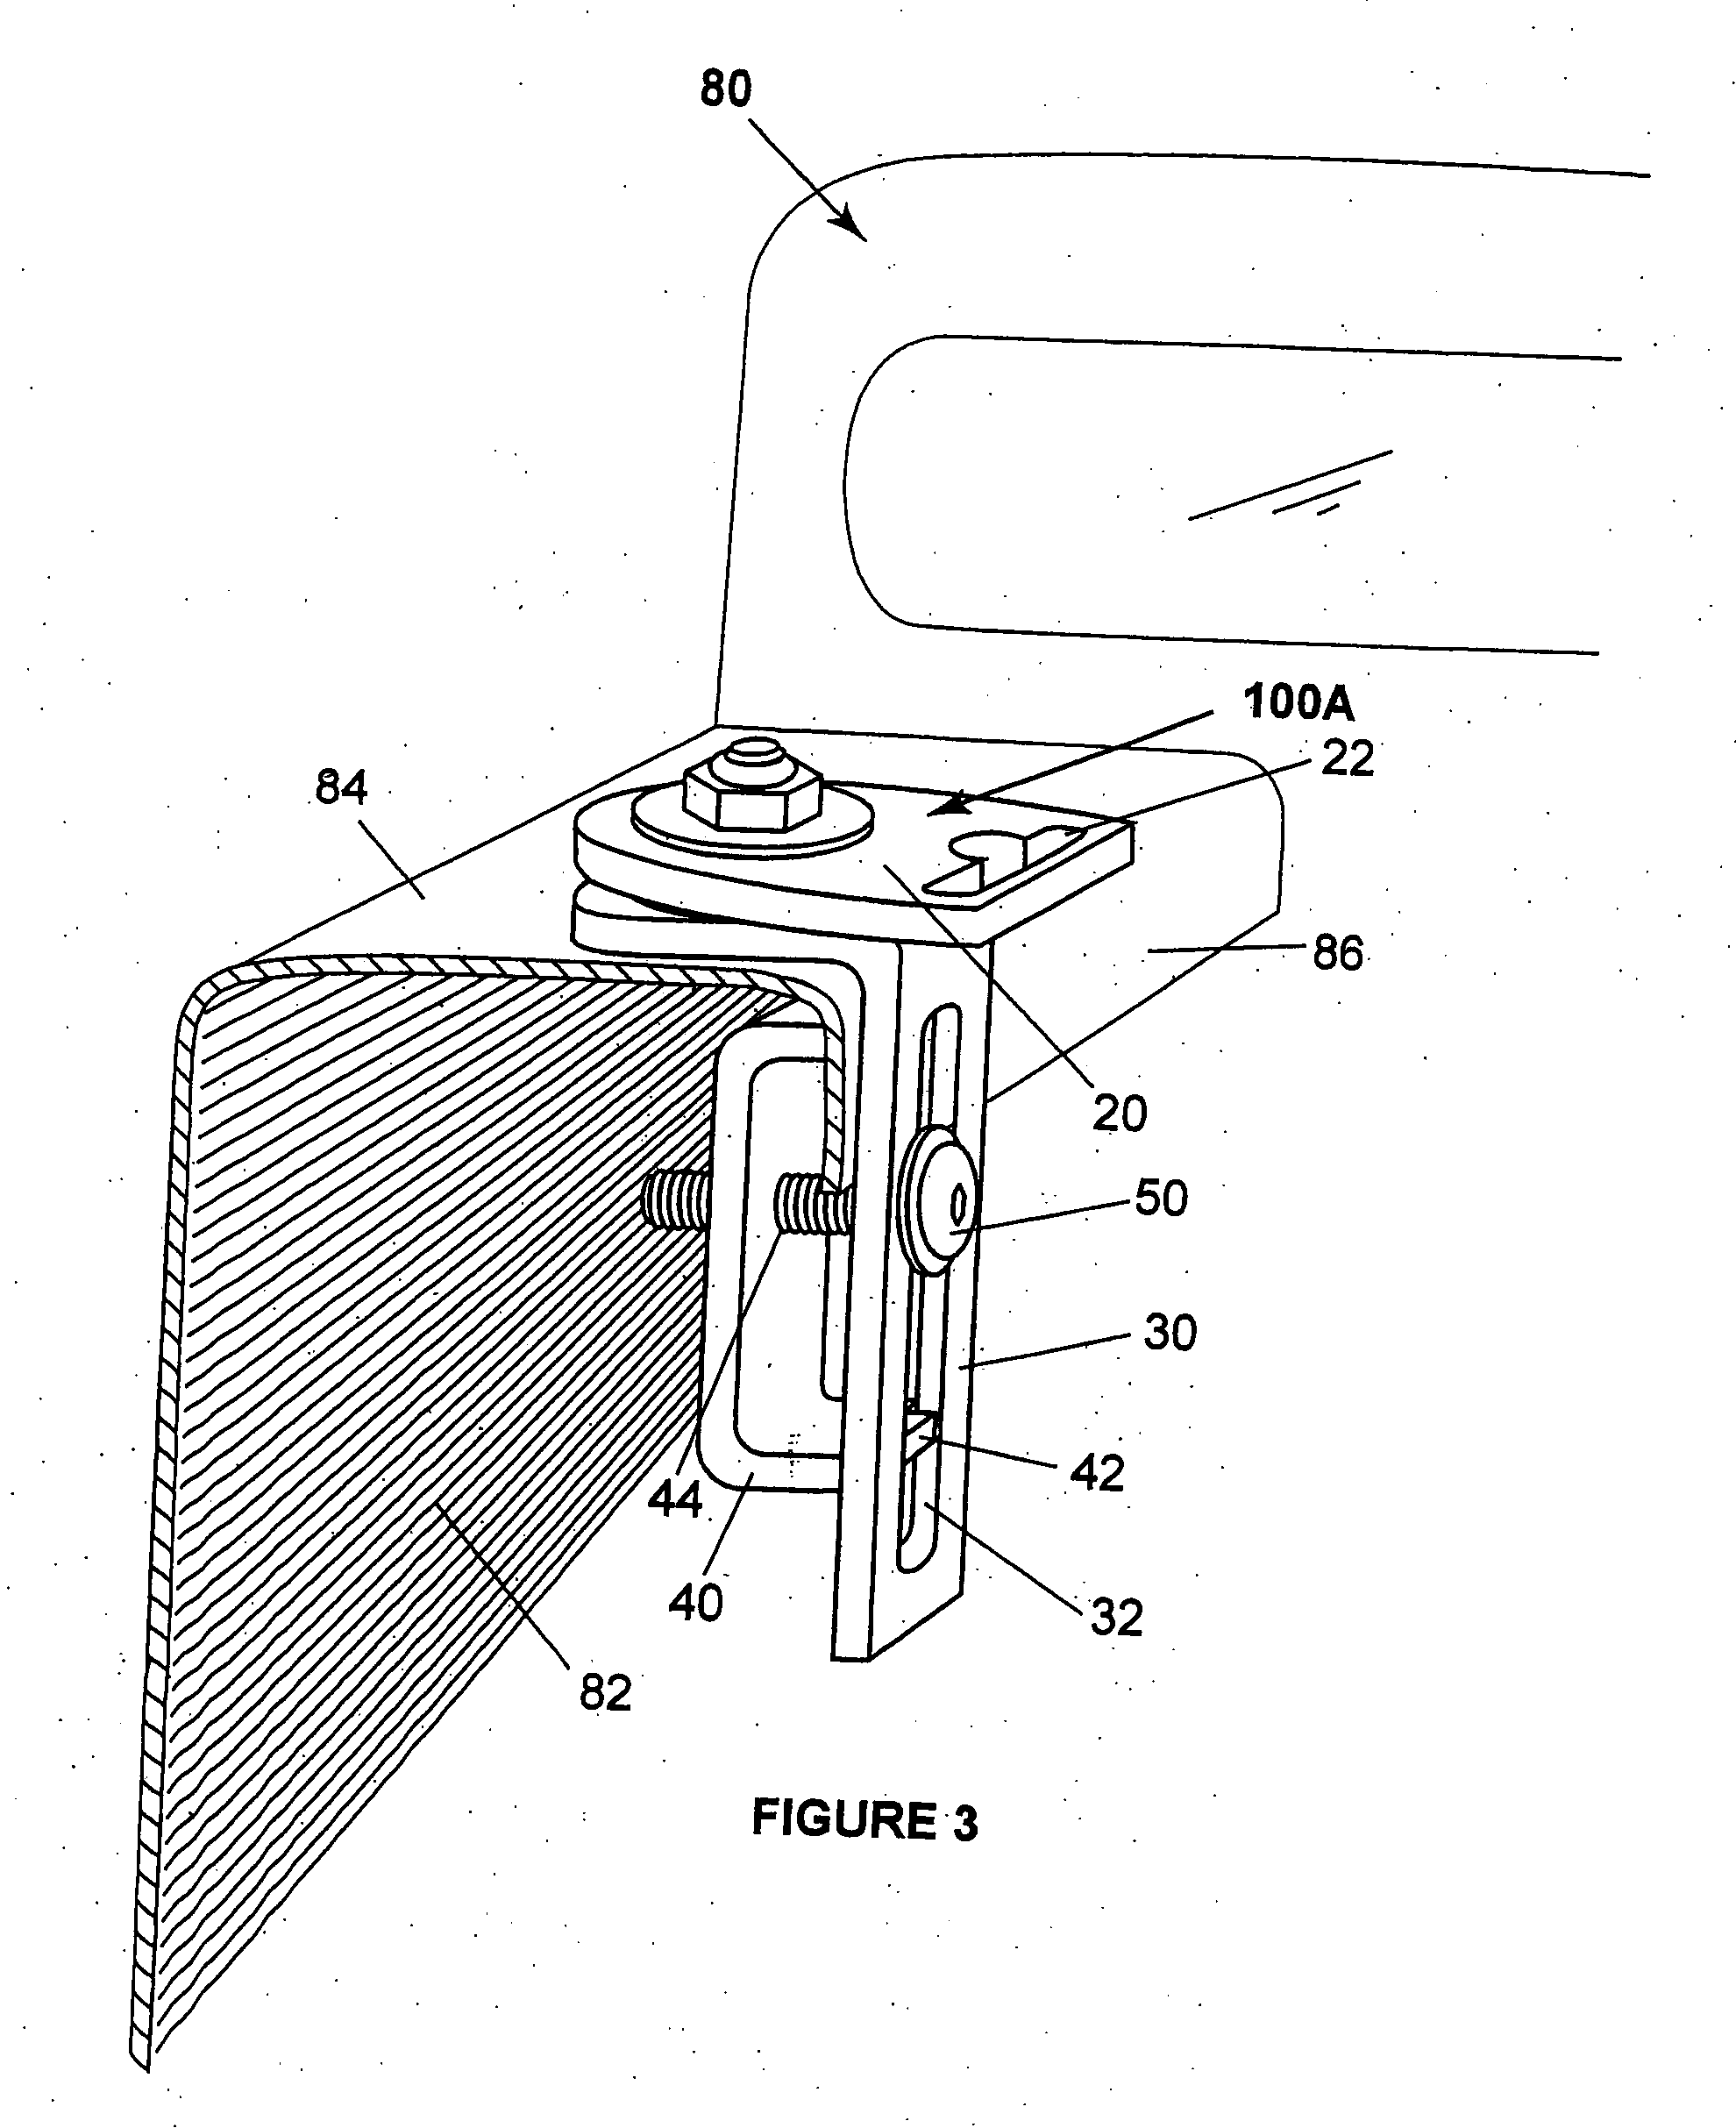 Cargo restraint anchor device for pick-up trucks